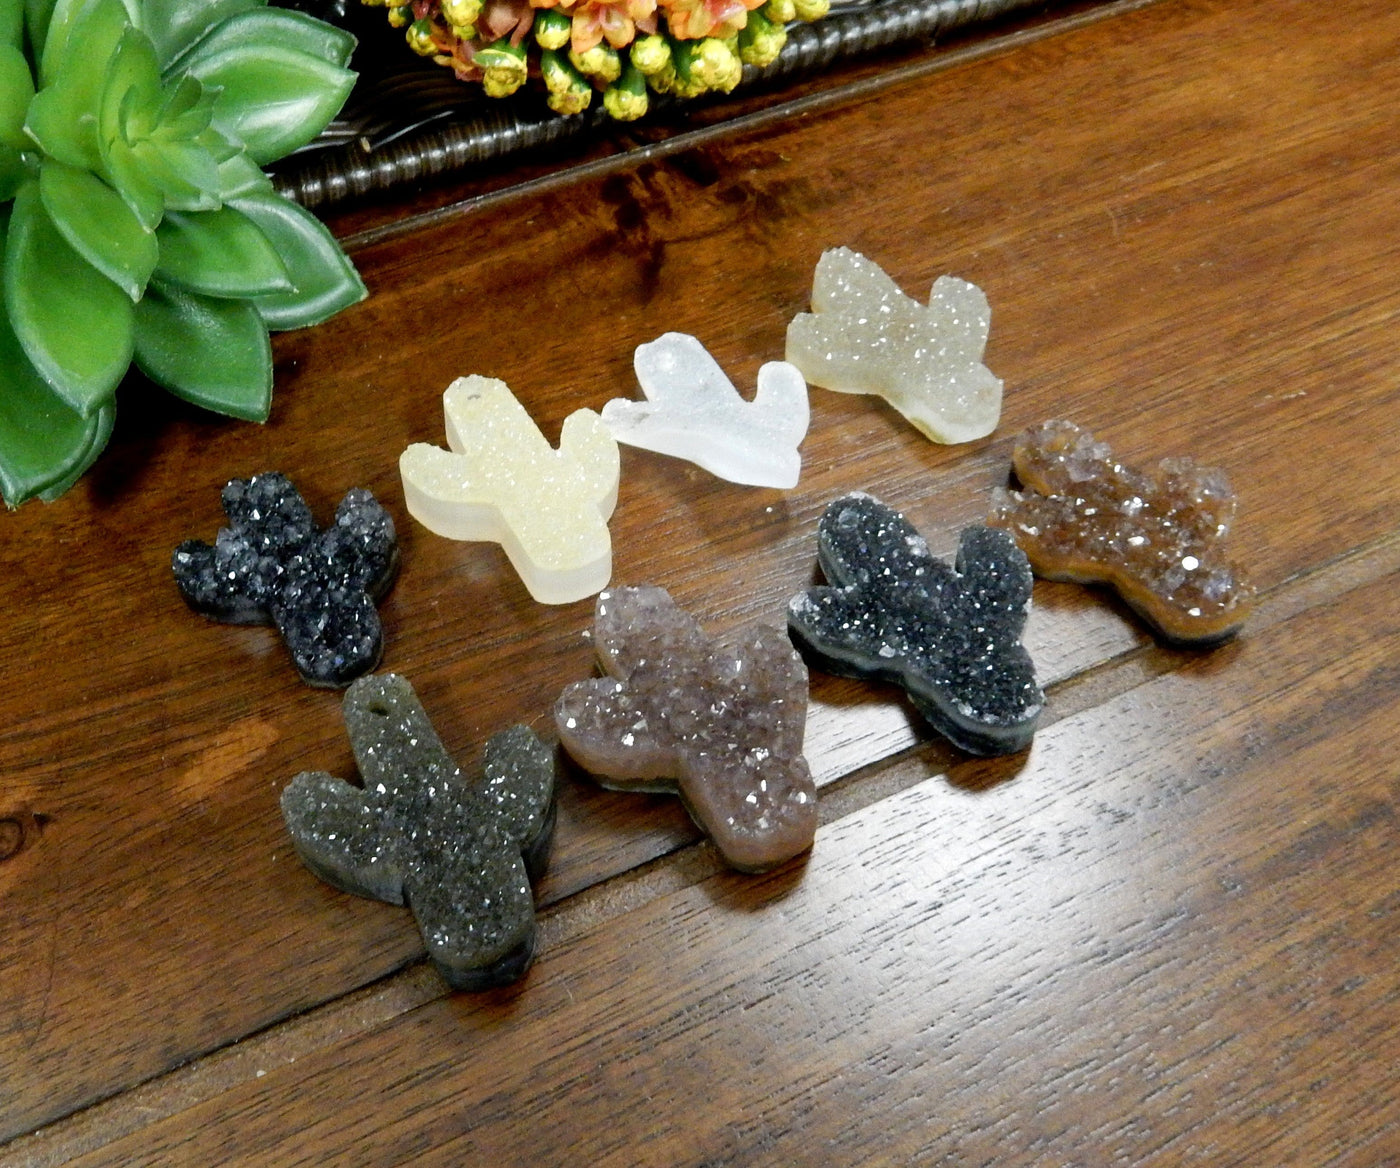 Assorted shades of quartz druzy cut into a cactus shape with a drilled hole on the top.  The colors they come in can be black, white, cream, tan, yellow, orange, purple, and black.